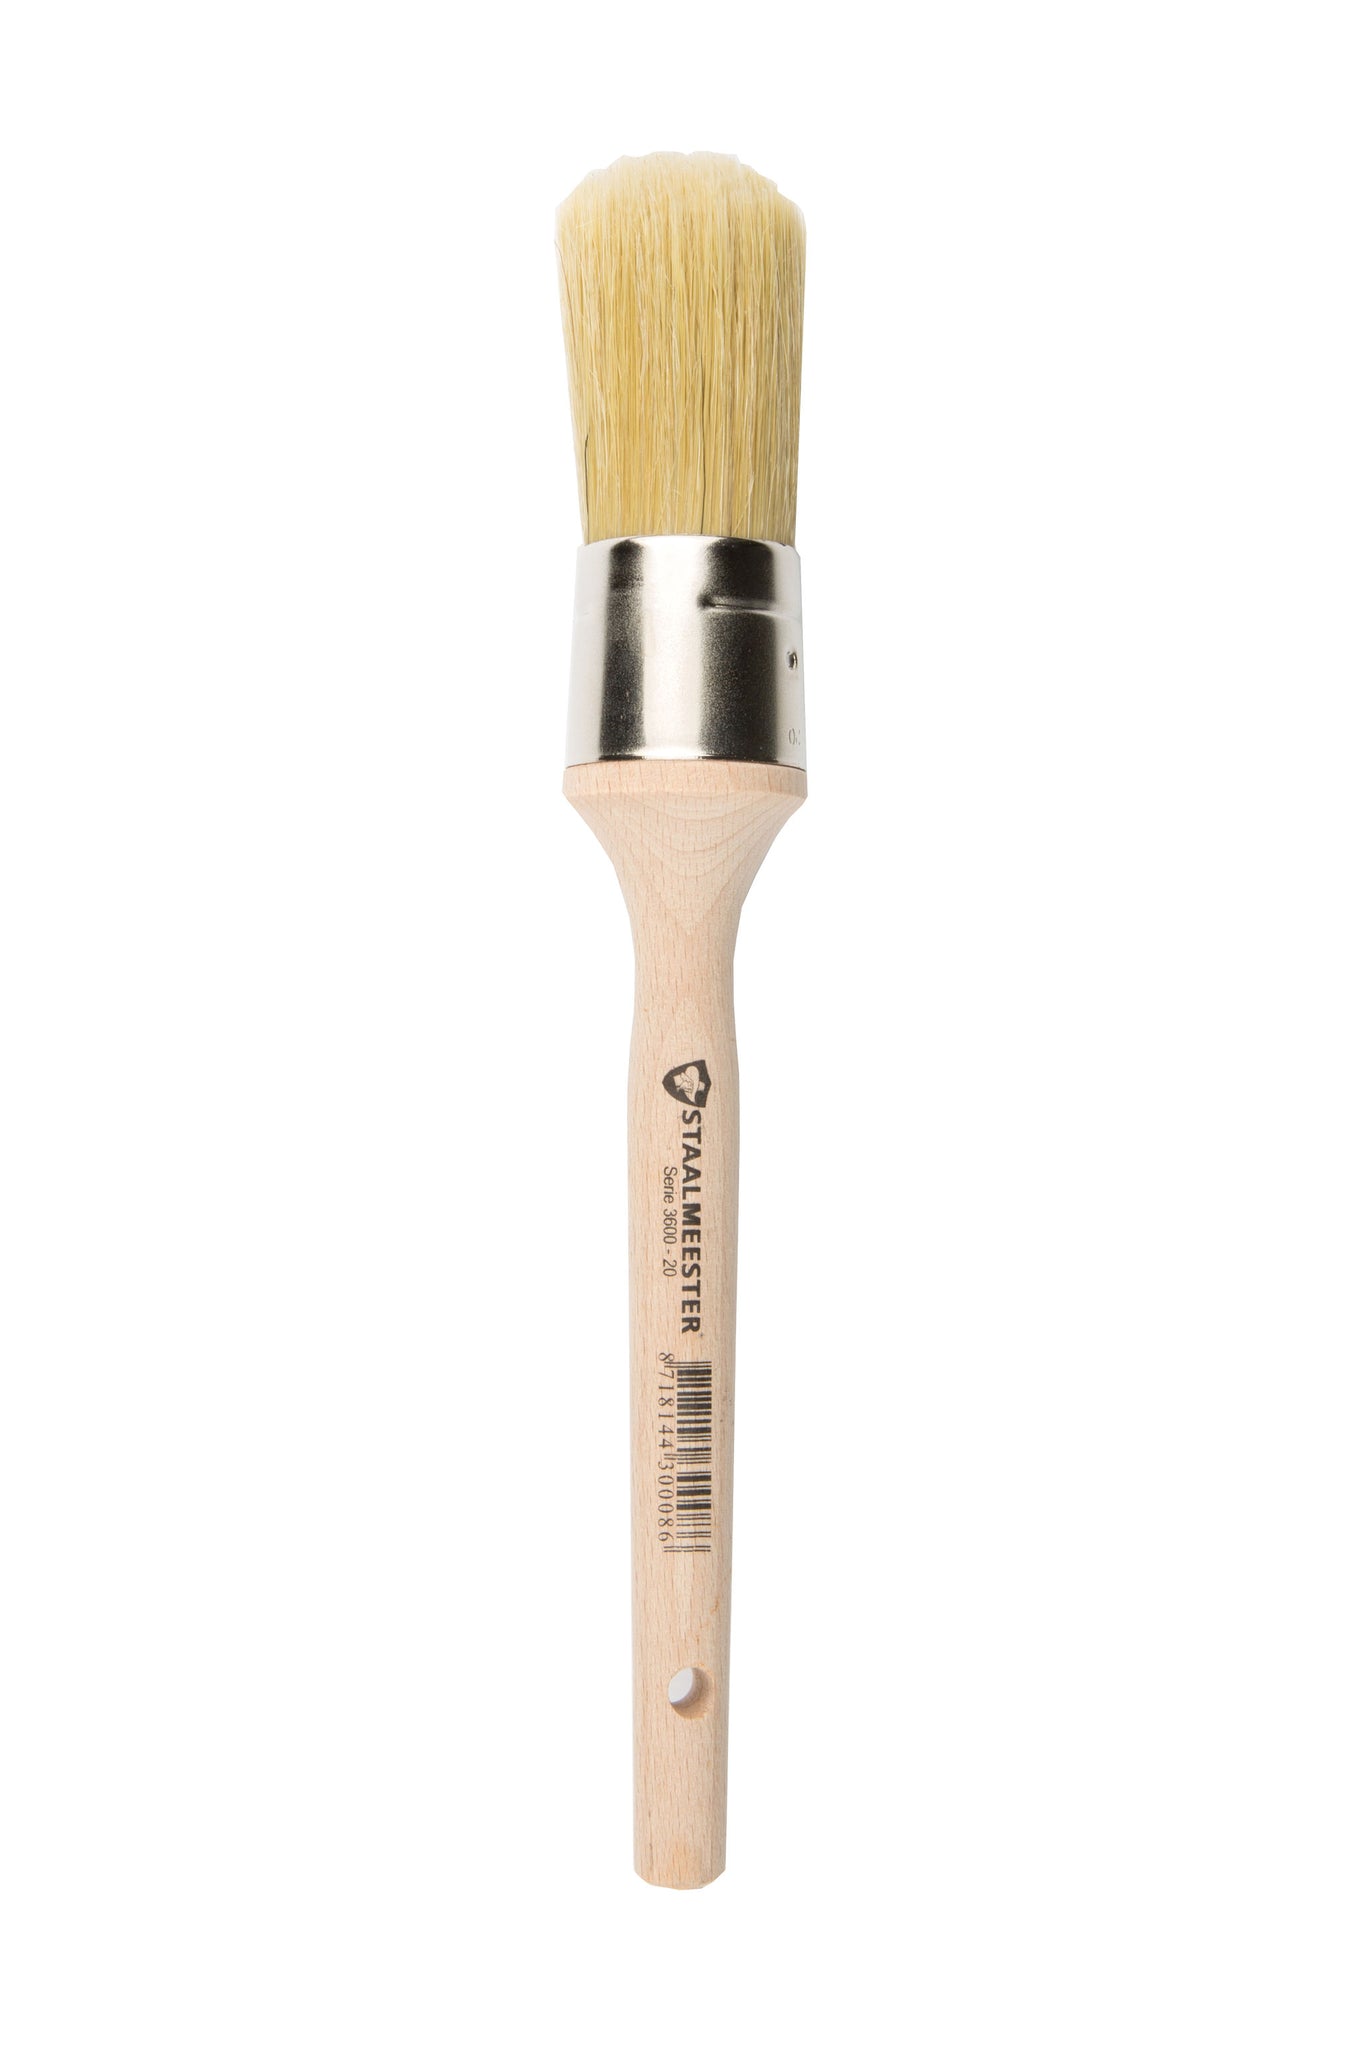 Staalmeester Pro-Hybrid Round Synthetic Brush #18